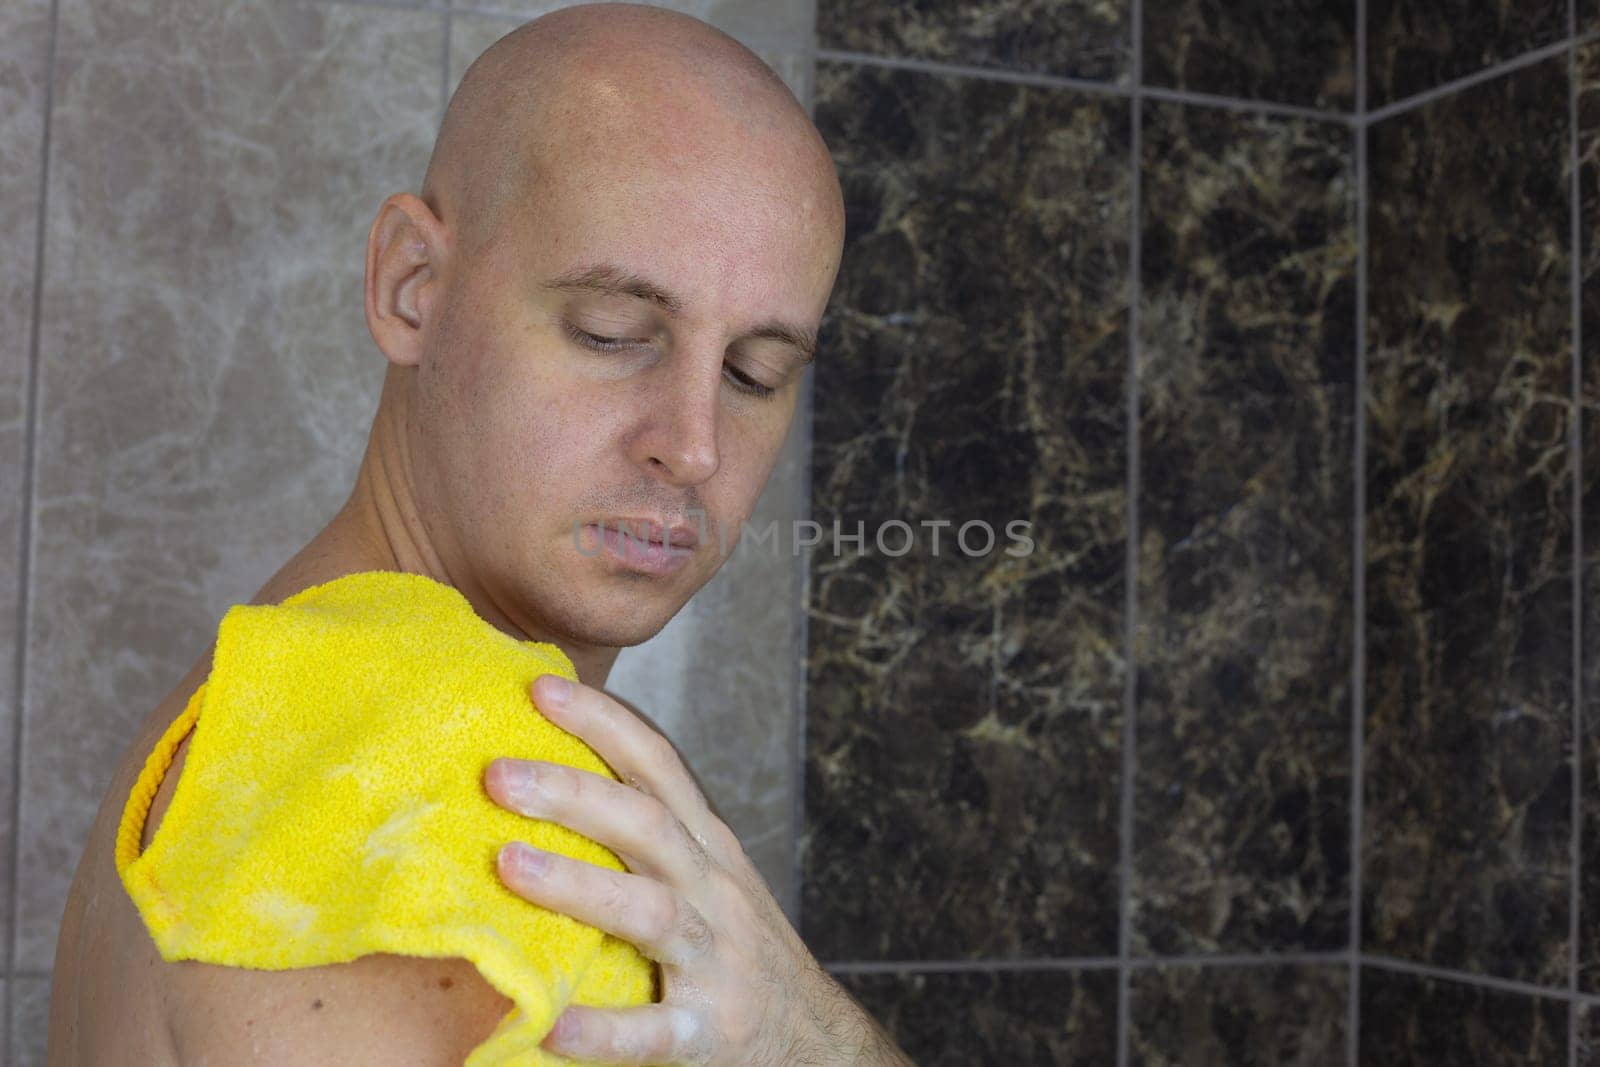 Man without hair washes himself in shower with washcloth, bald guy takes care of his skin in the shower with a special product with foam